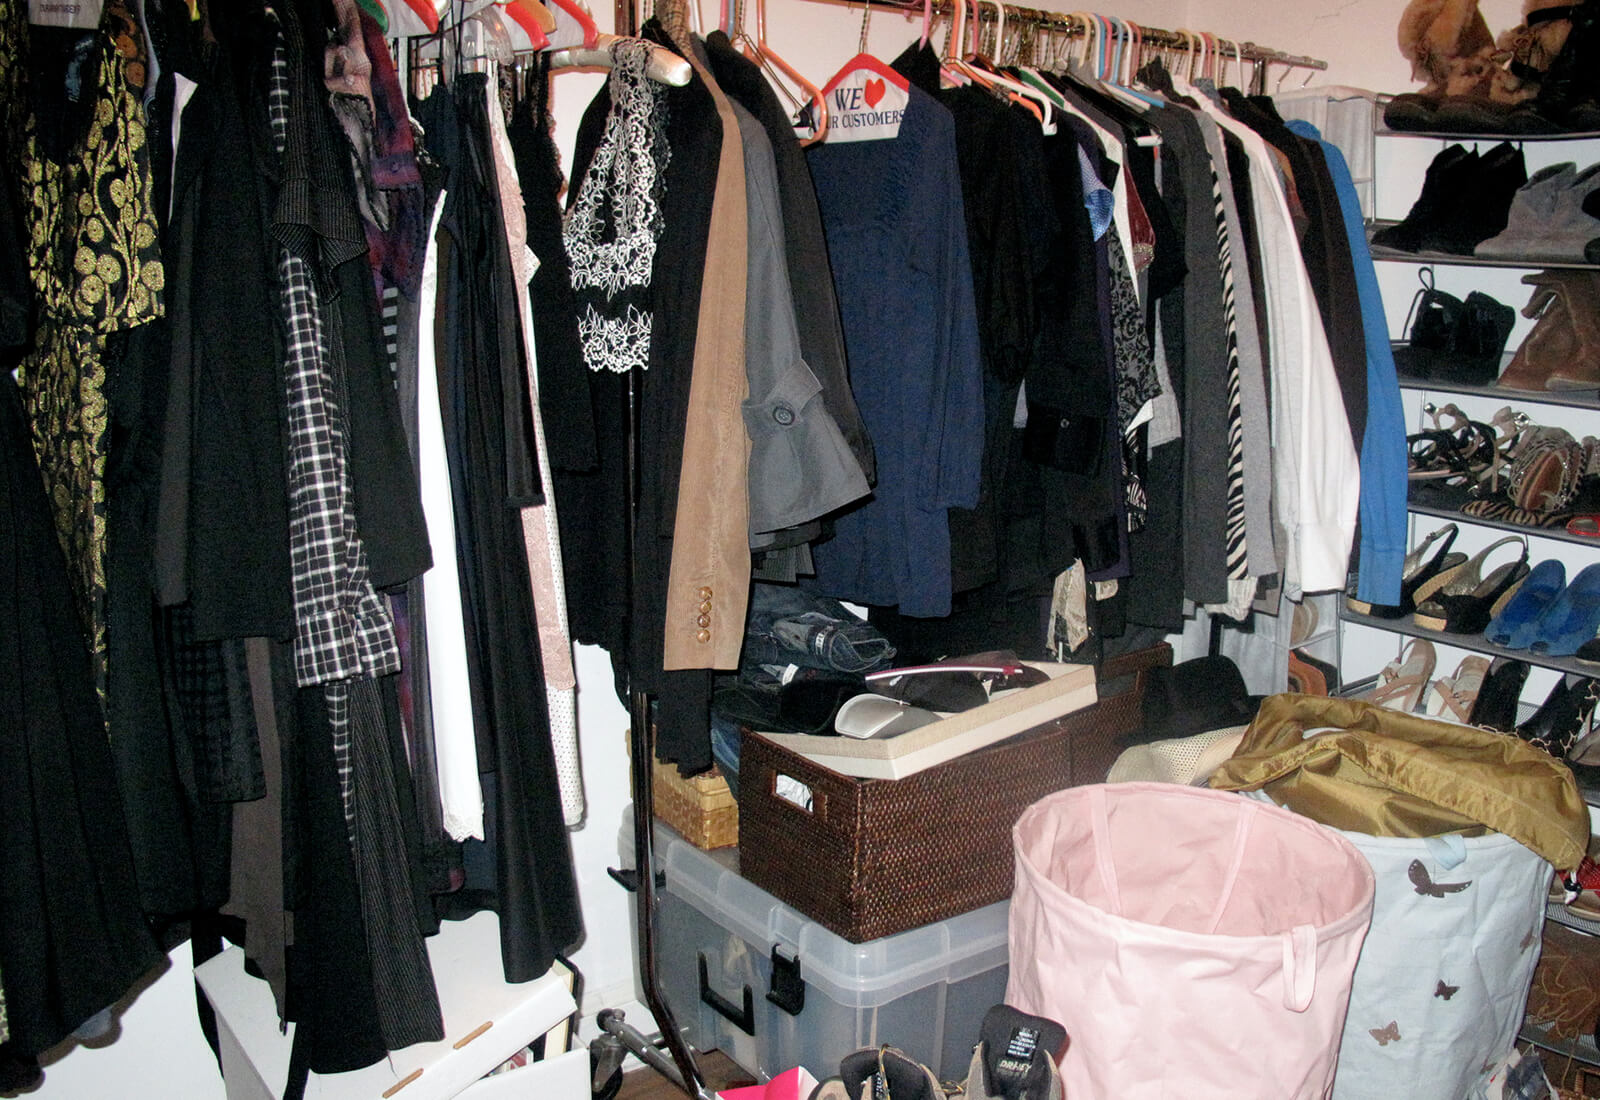 Closet with clutter